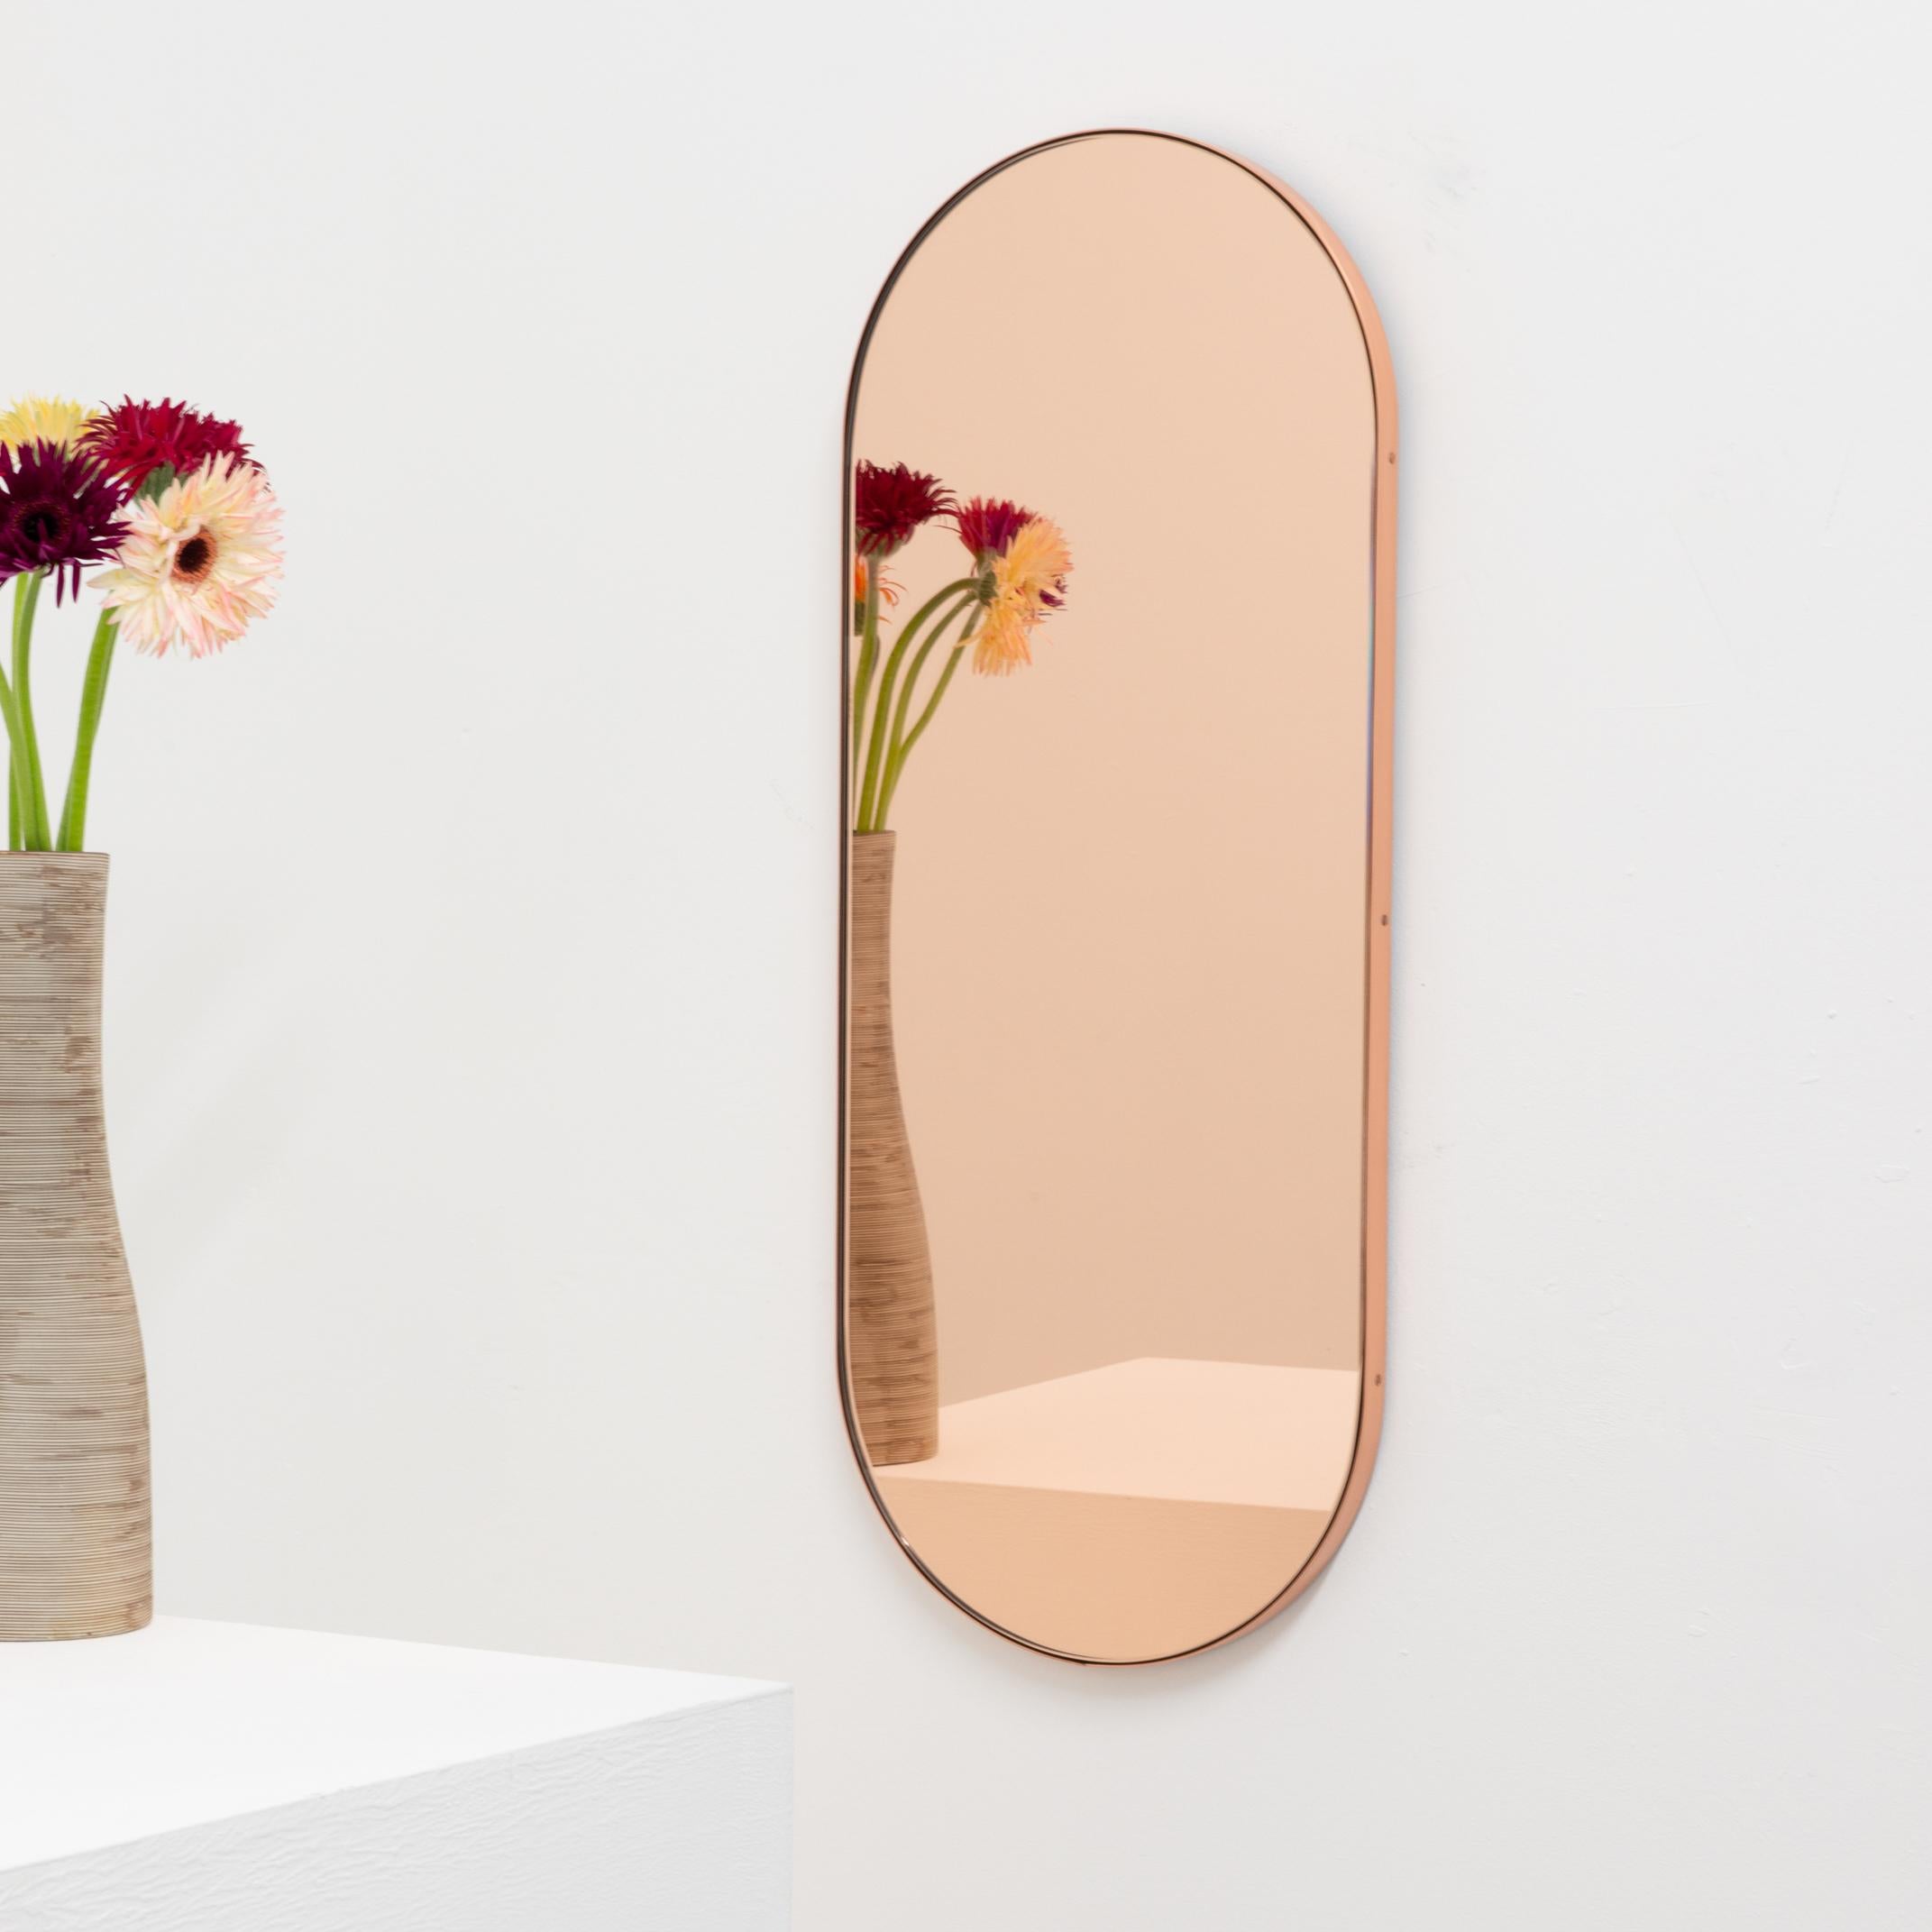 Capsula Capsule Shaped Rose Gold Mirror with Copper Frame, Medium In New Condition For Sale In London, GB